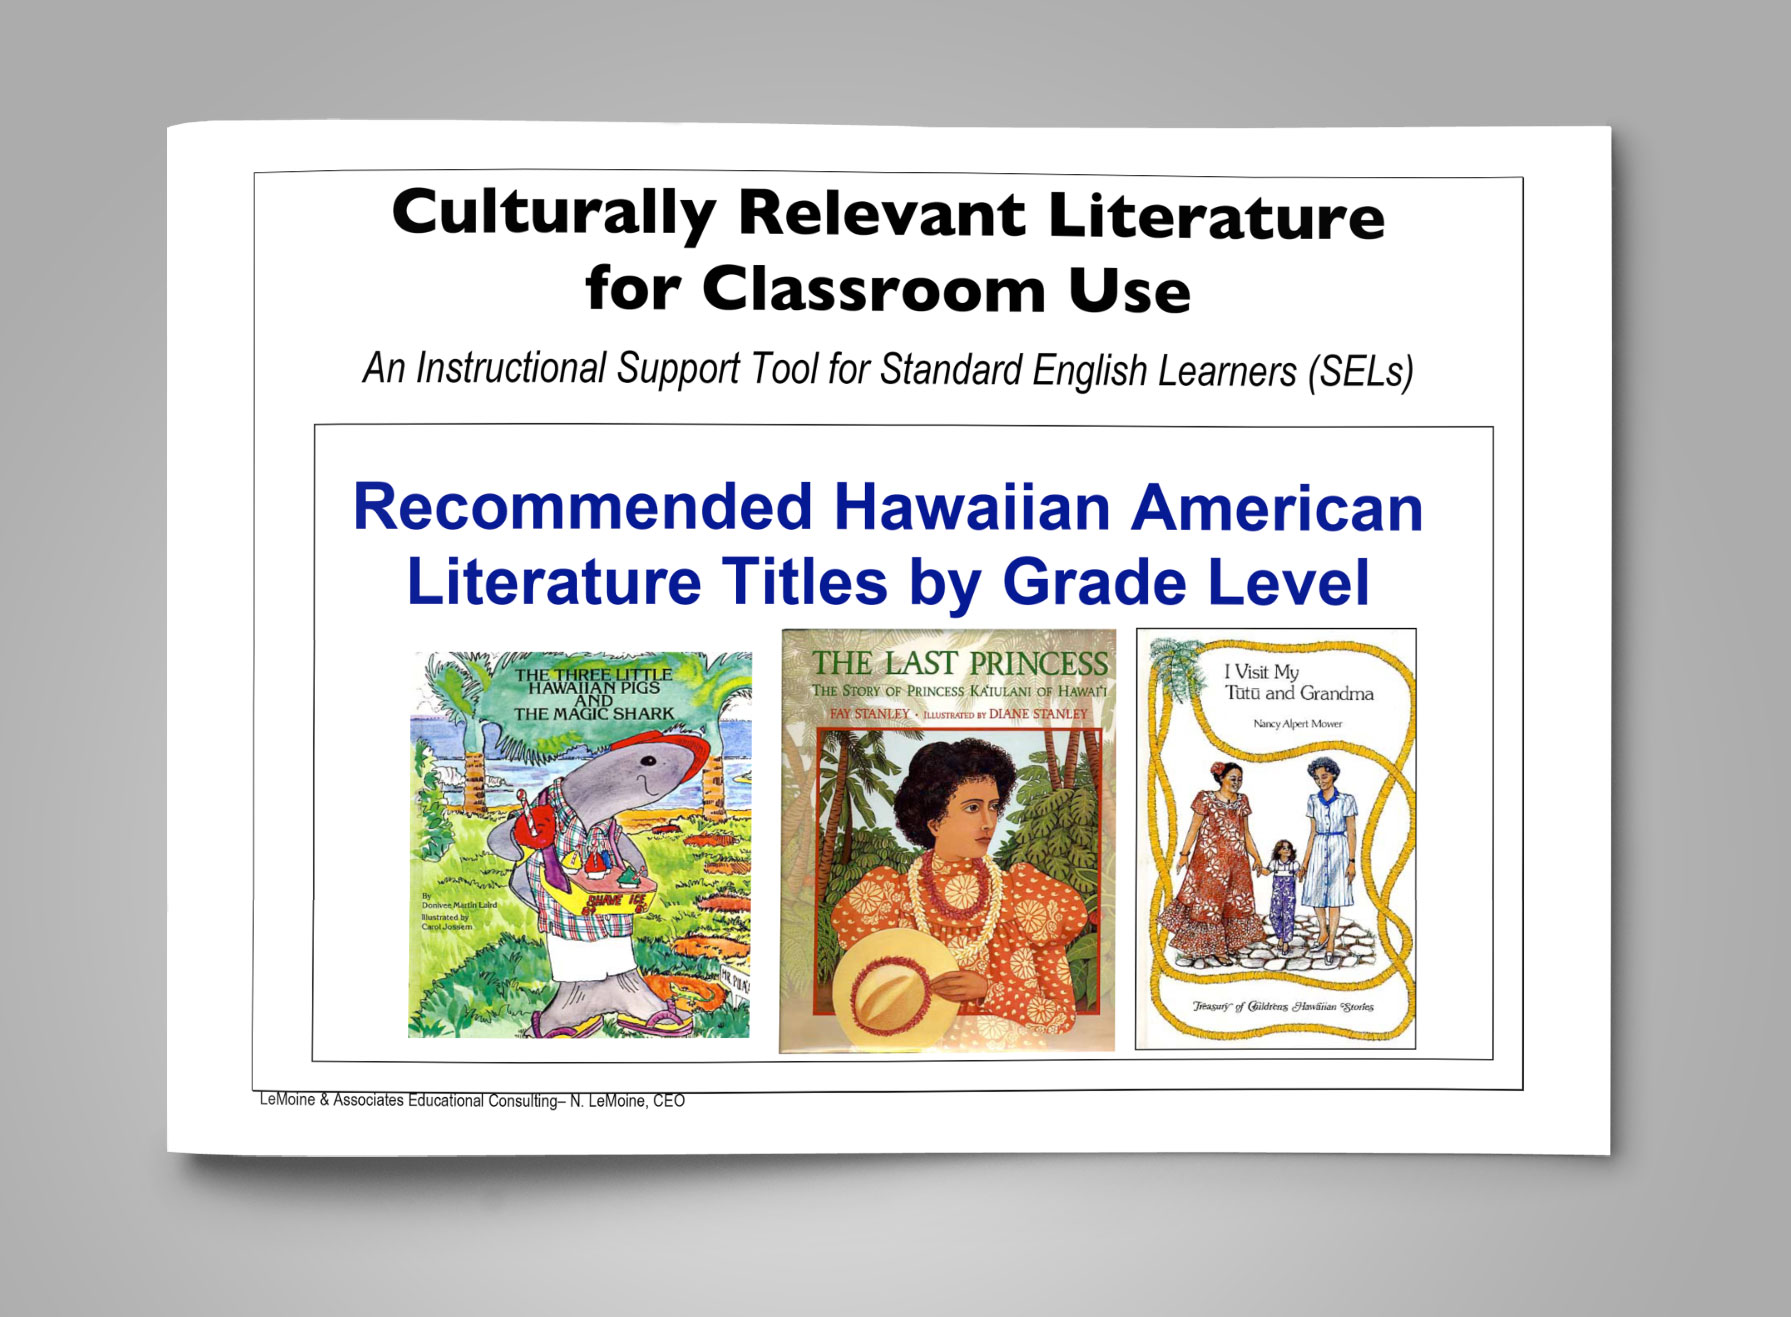 Culturally Relevant Literature for Classroom Use Recommended Hawaiian American Literature Titles by Grade Level